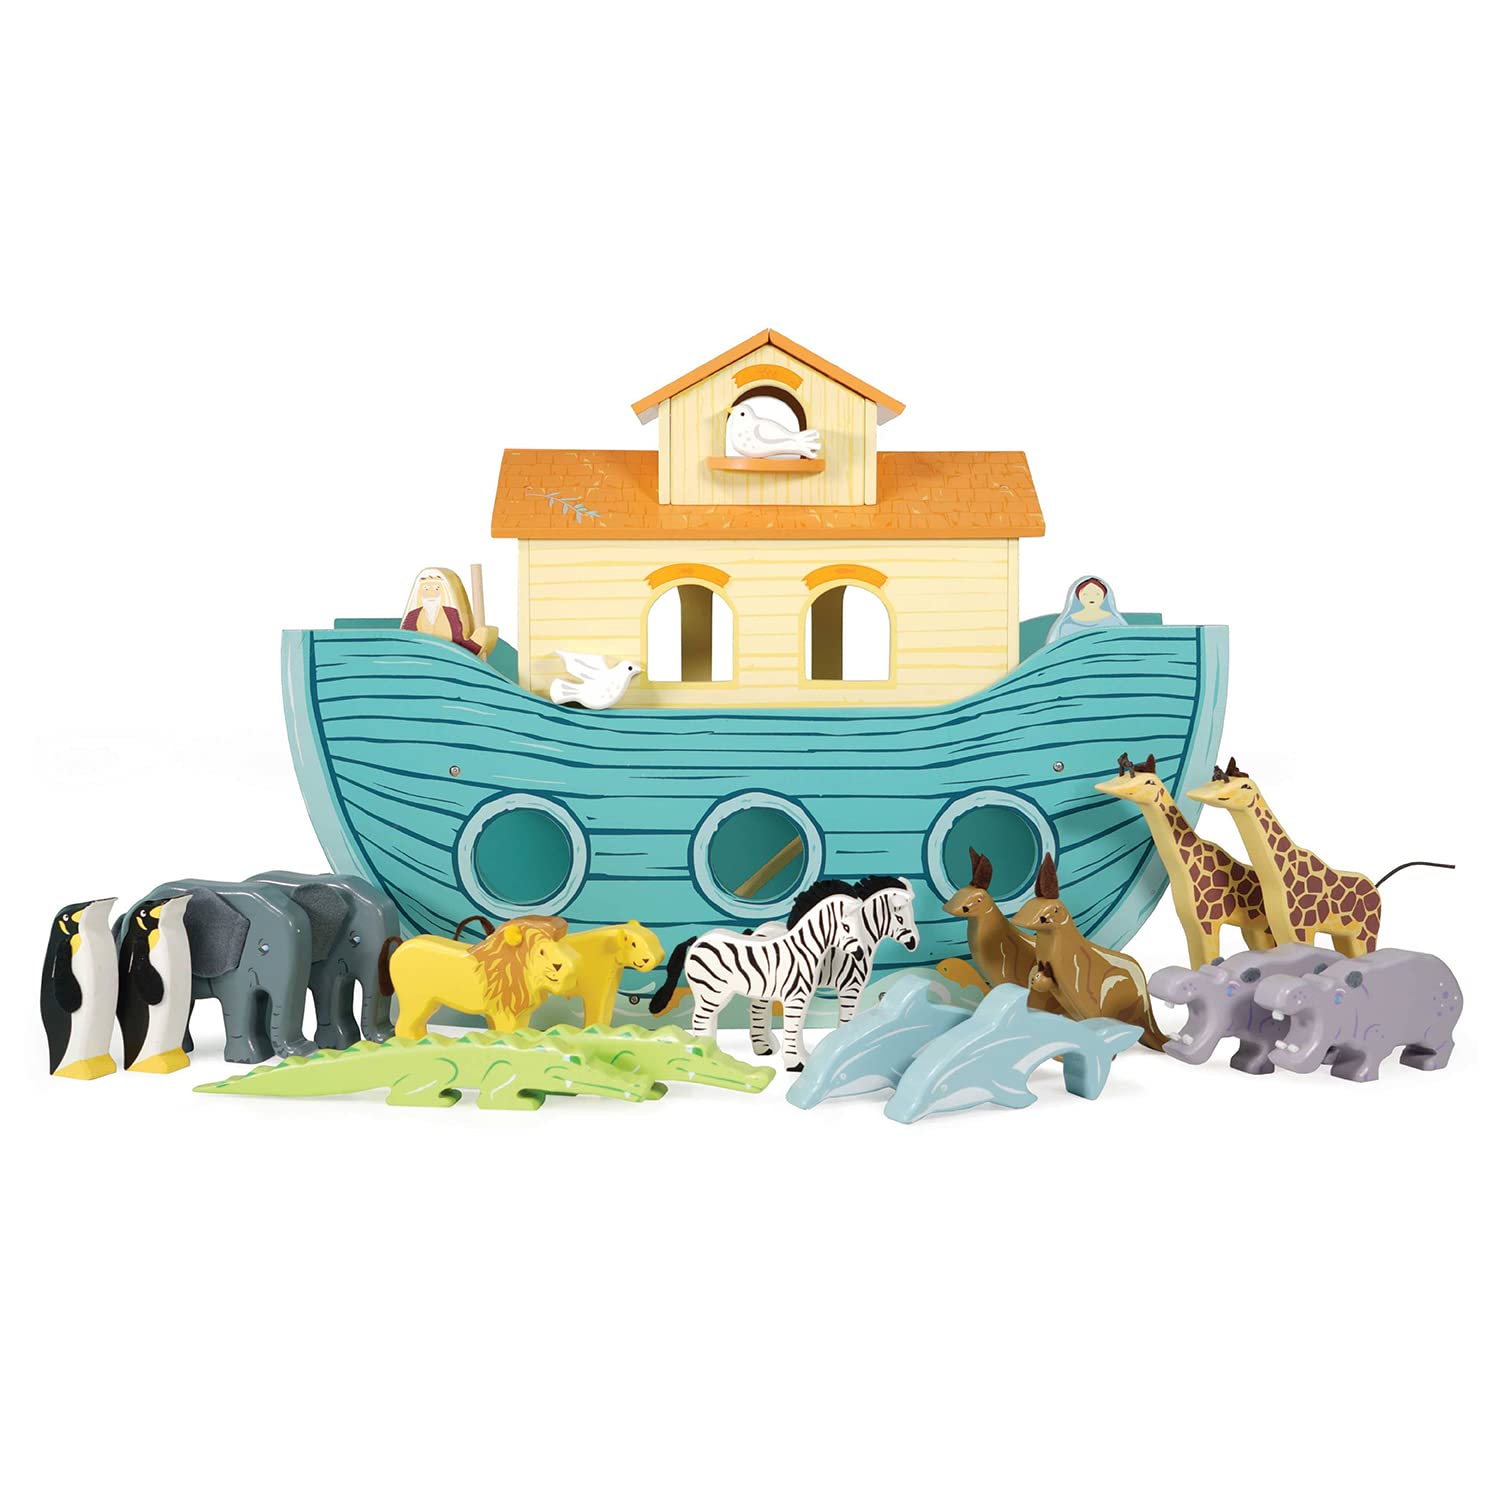 Le Toy Van - Pretend Play Educational Wooden Ark Role Play Toy | Suitable for A Boy Or A Girl 3 Years Old Or Older (TV259)